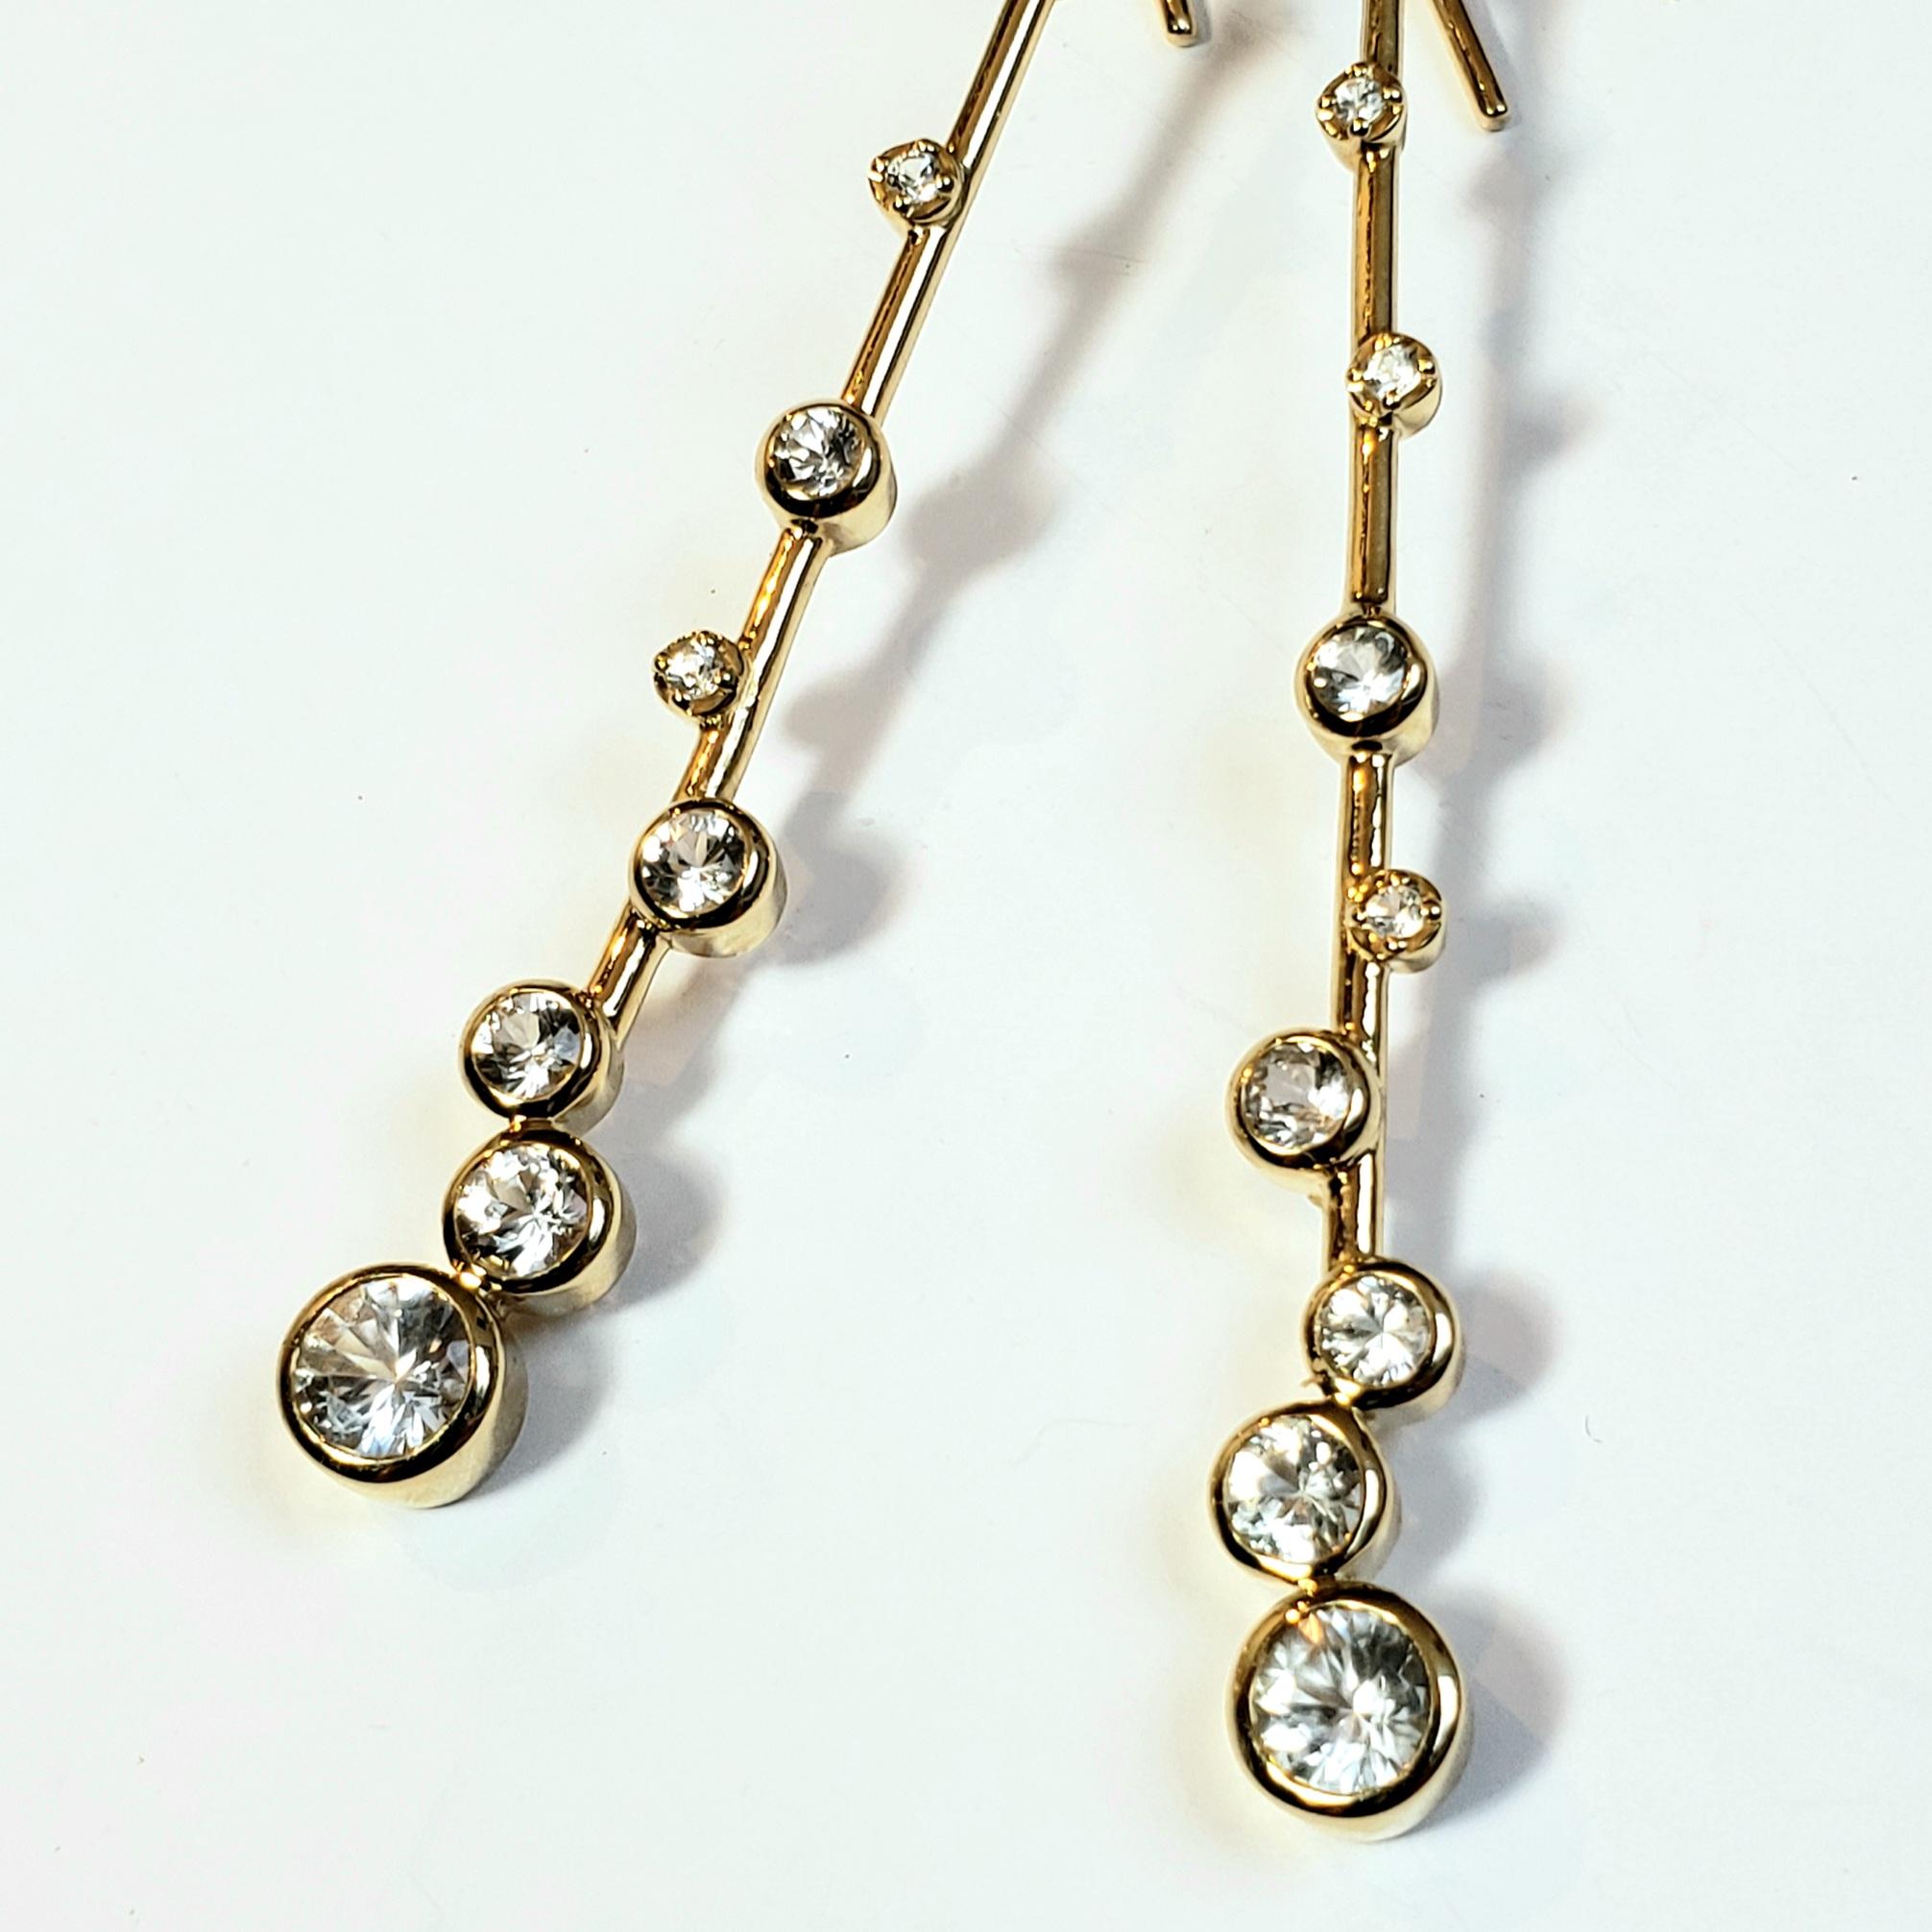 Round Cut Elongated Dangle Earrings in 14 Karat Gold with White Sapphires and Diamonds